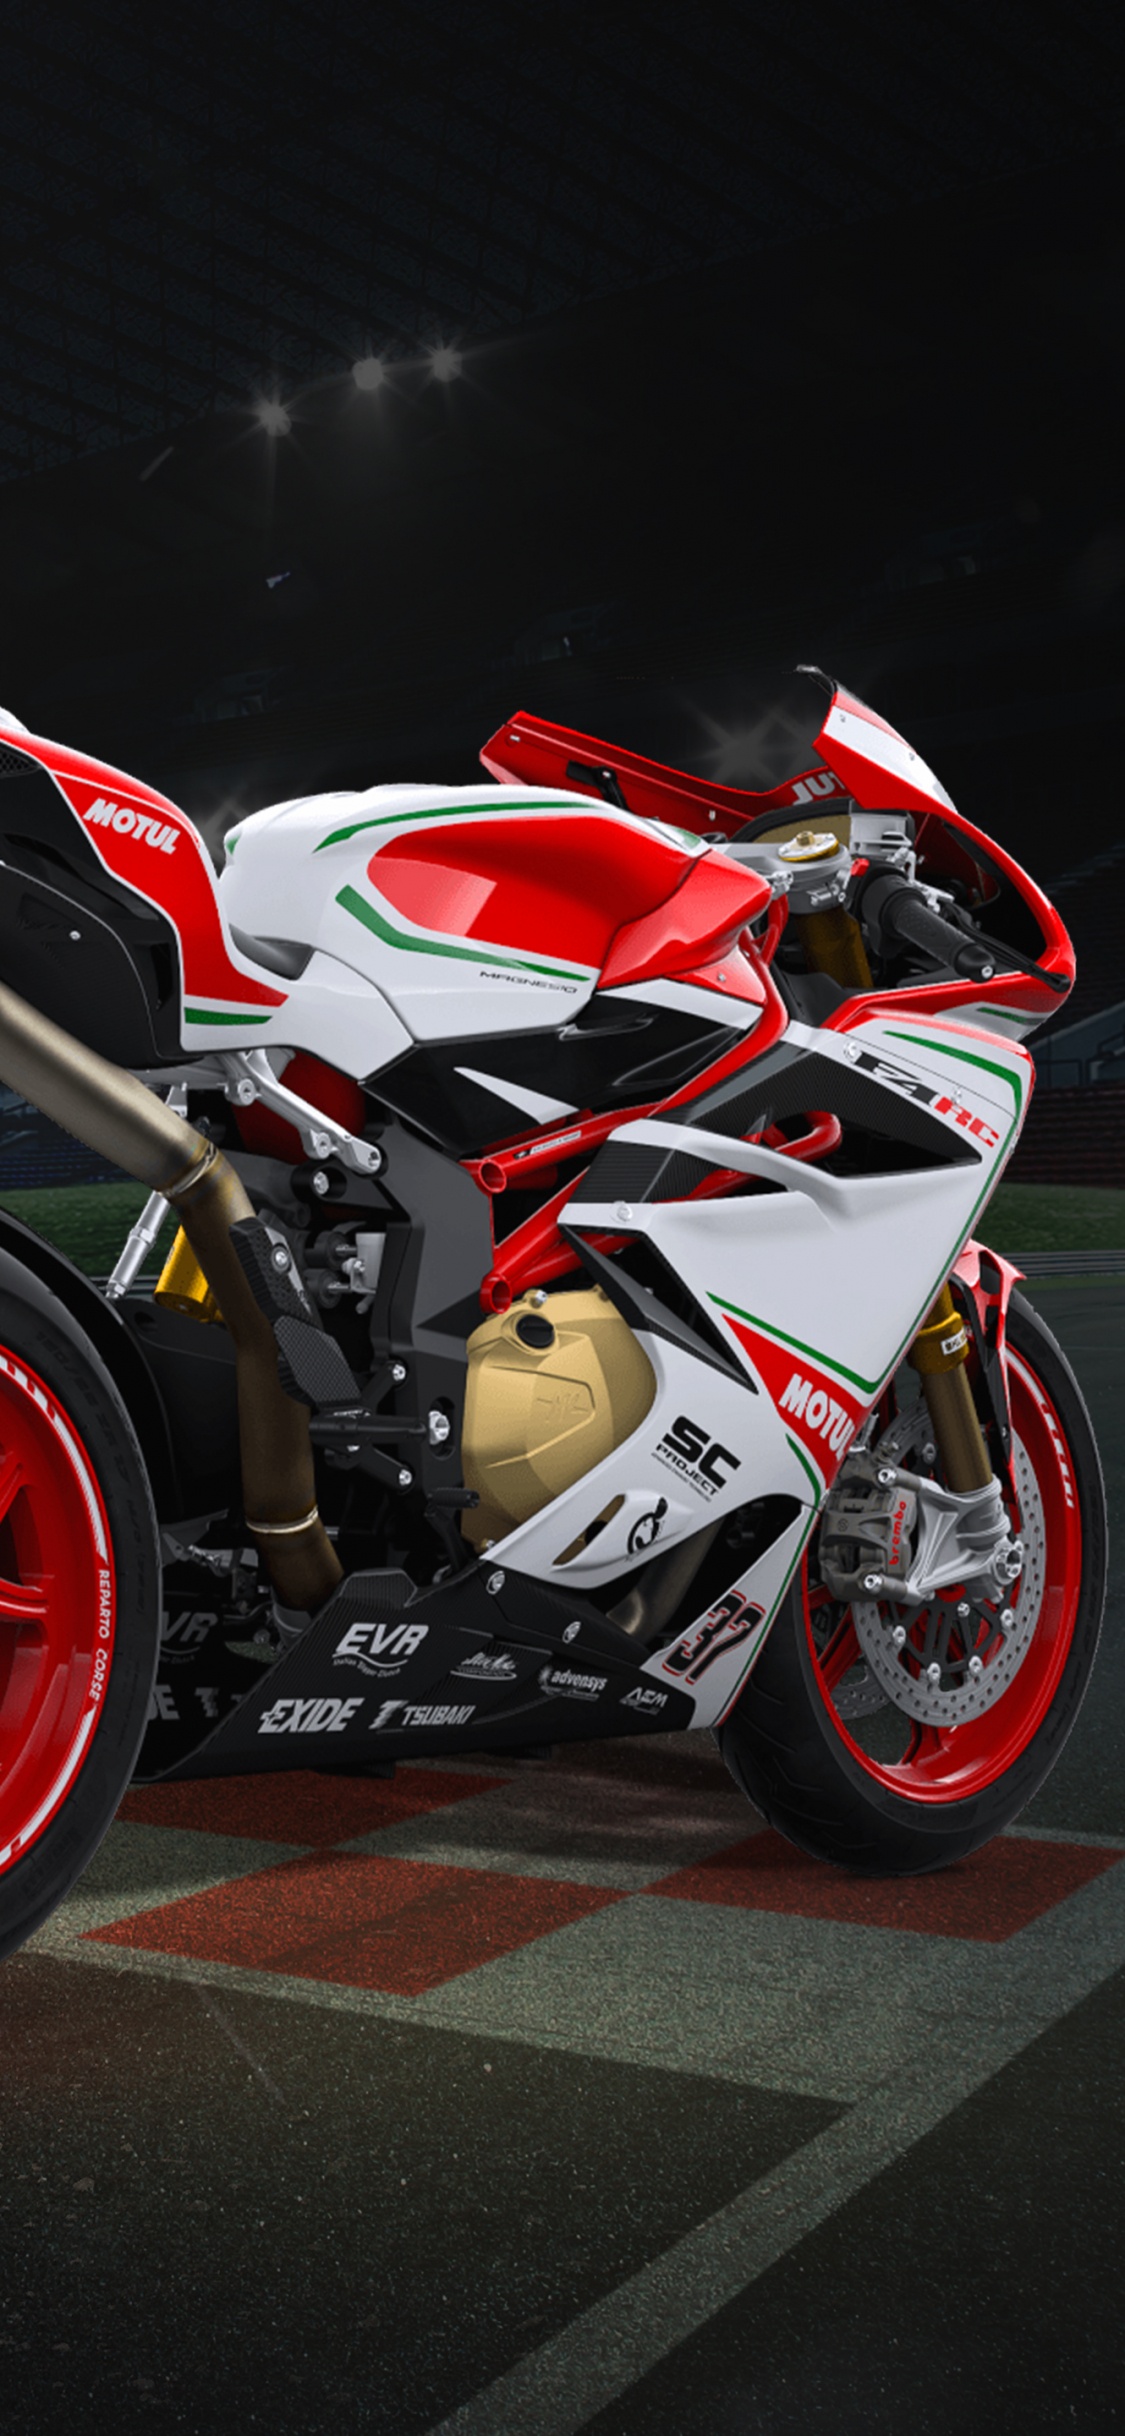 Red and White Sports Bike on Track Field. Wallpaper in 1125x2436 Resolution